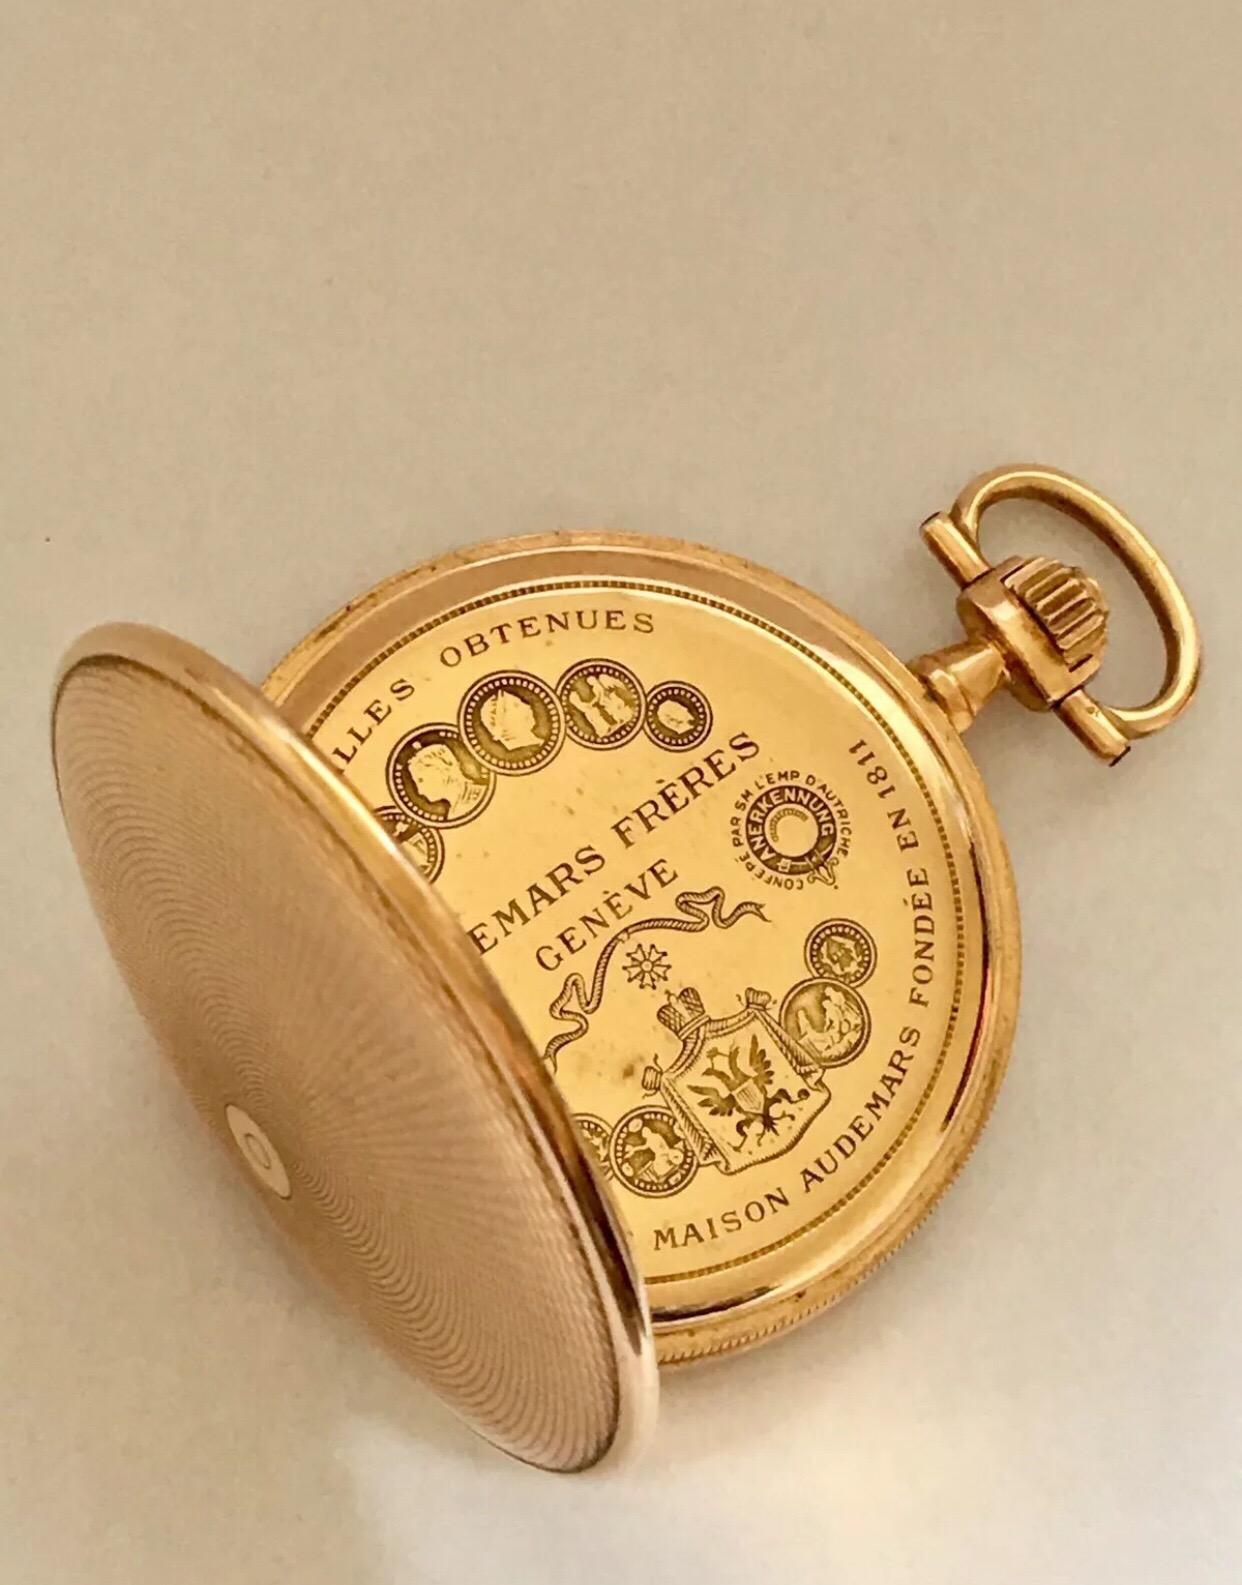 This fine antique pocket watch features a double full hunter case with elegant engine turned decoration. With its beautiful gold dial and numeric numbers and a seconds sub-dial. The movement is stem wound, stem set, completely gilt The elegantly